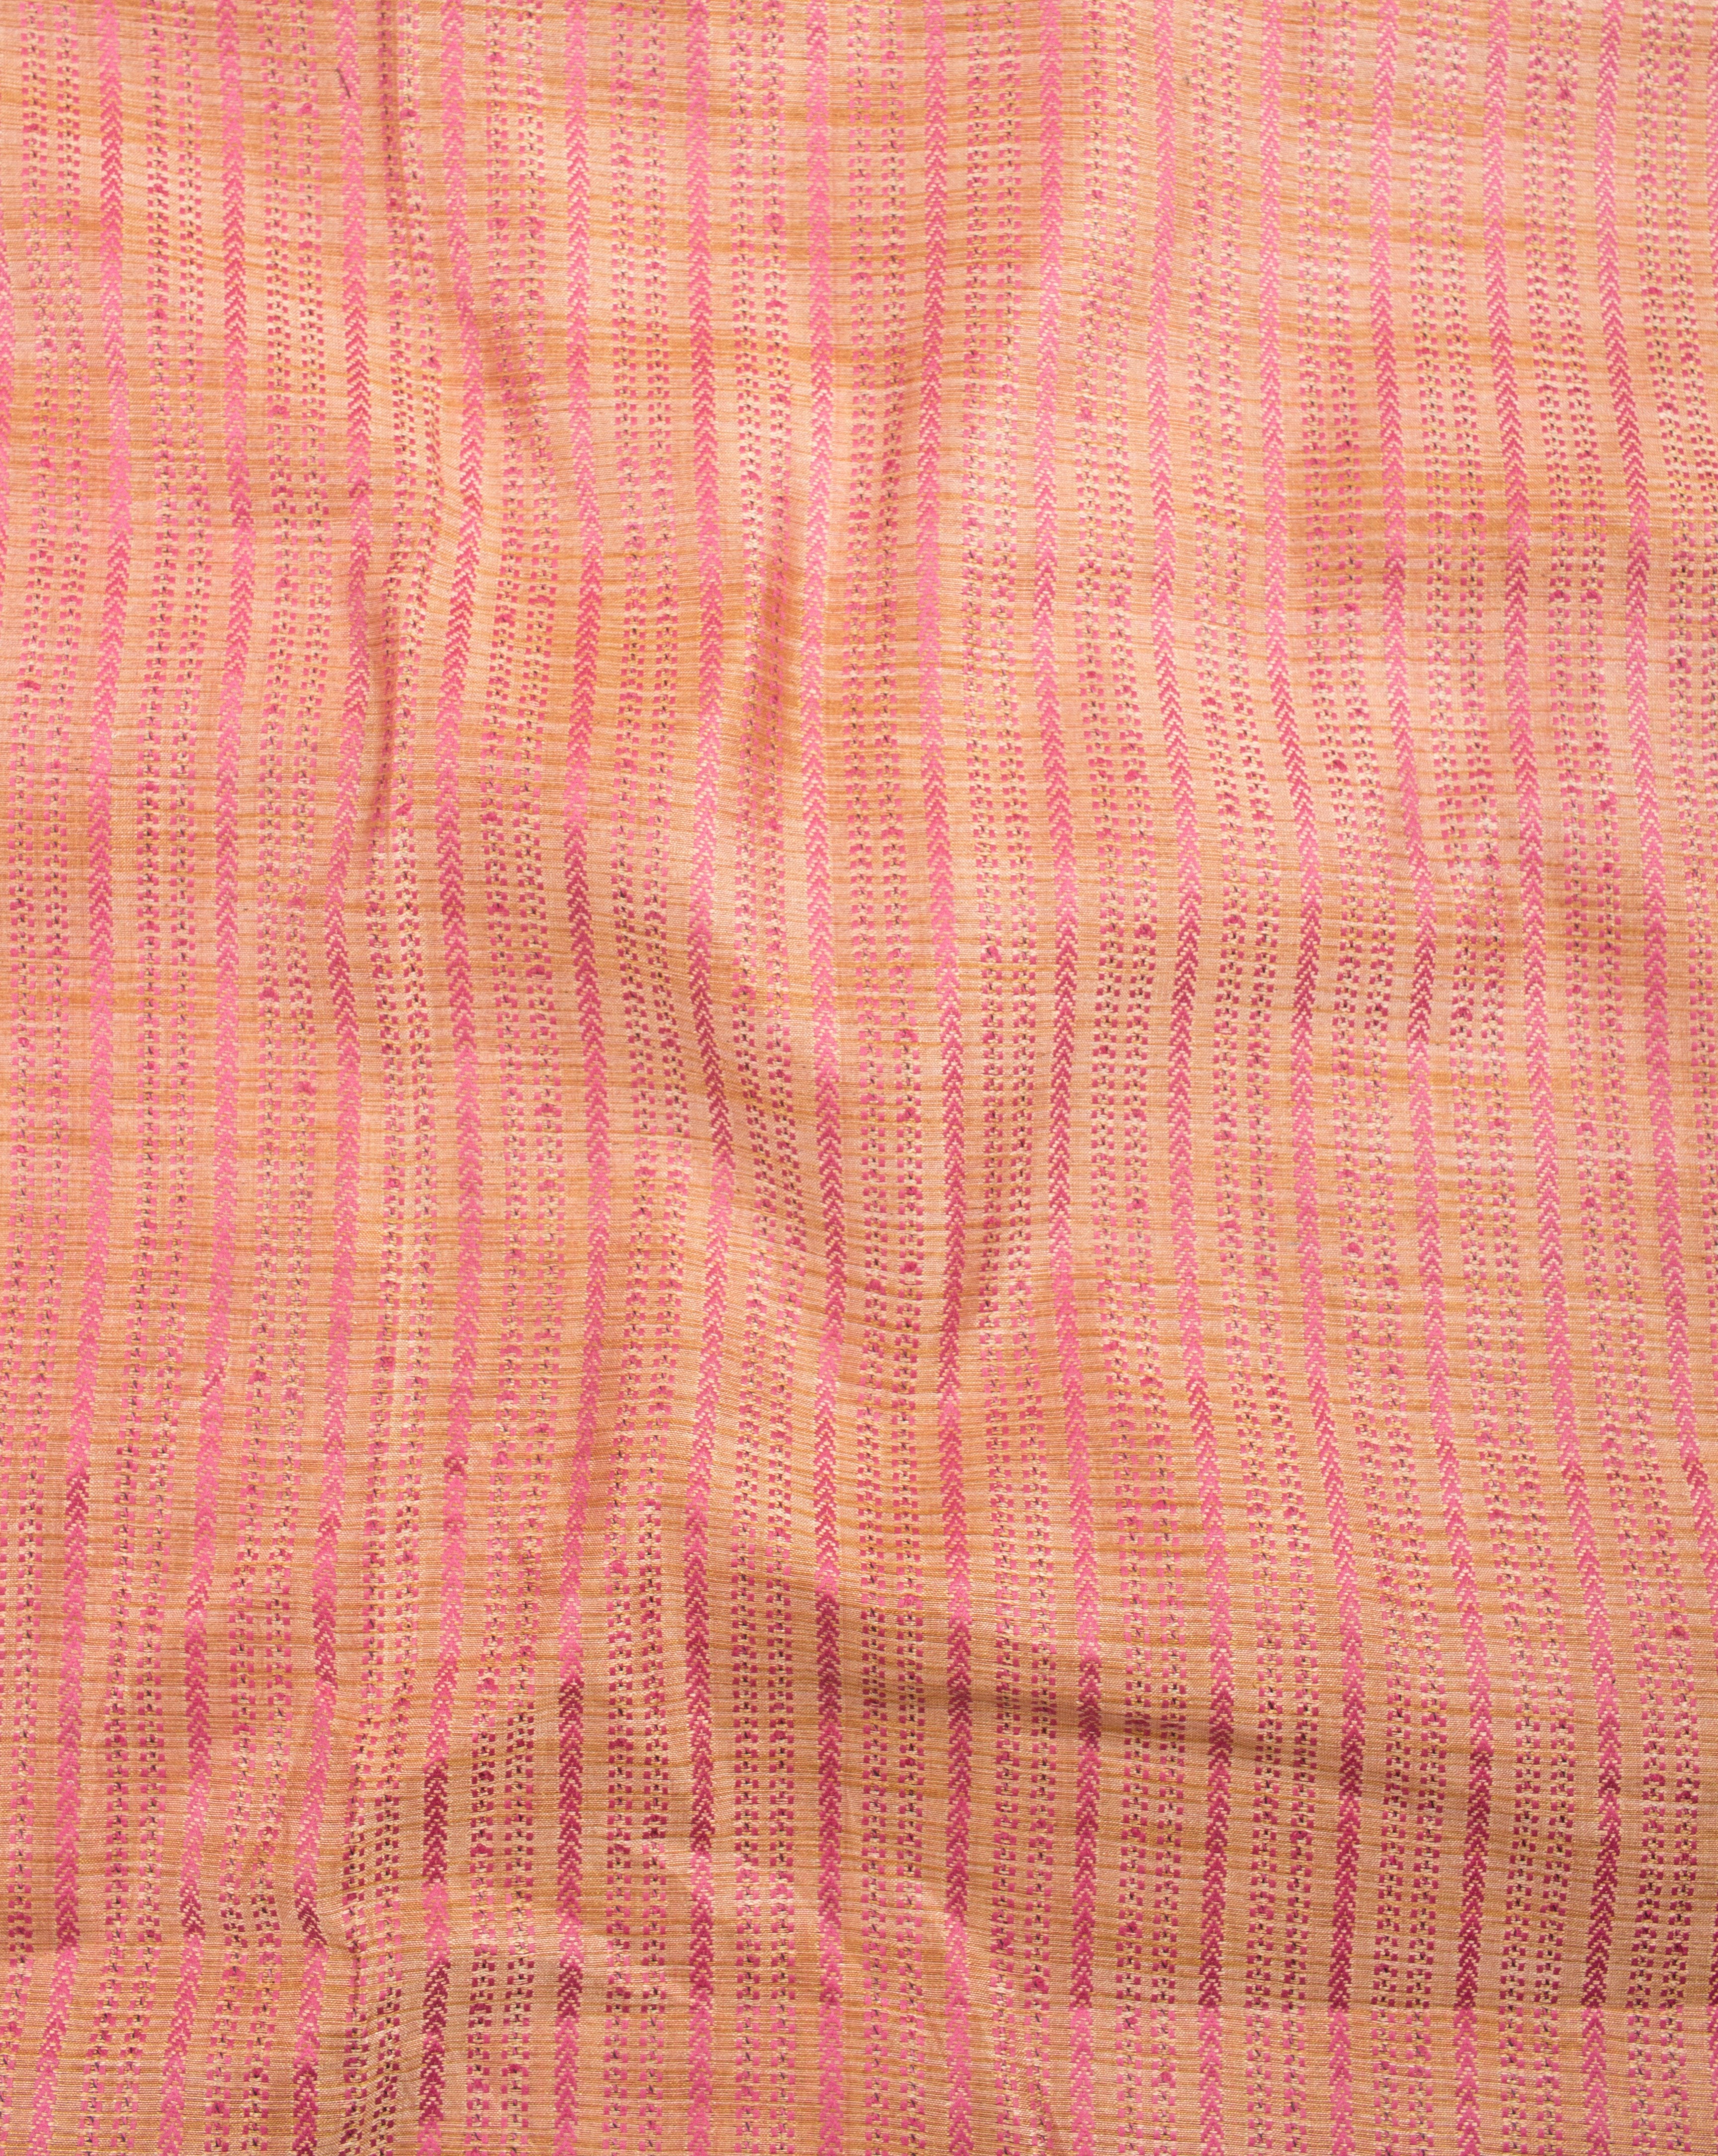 Jacquard Blended Cotton Fabric - Fabriclore.com